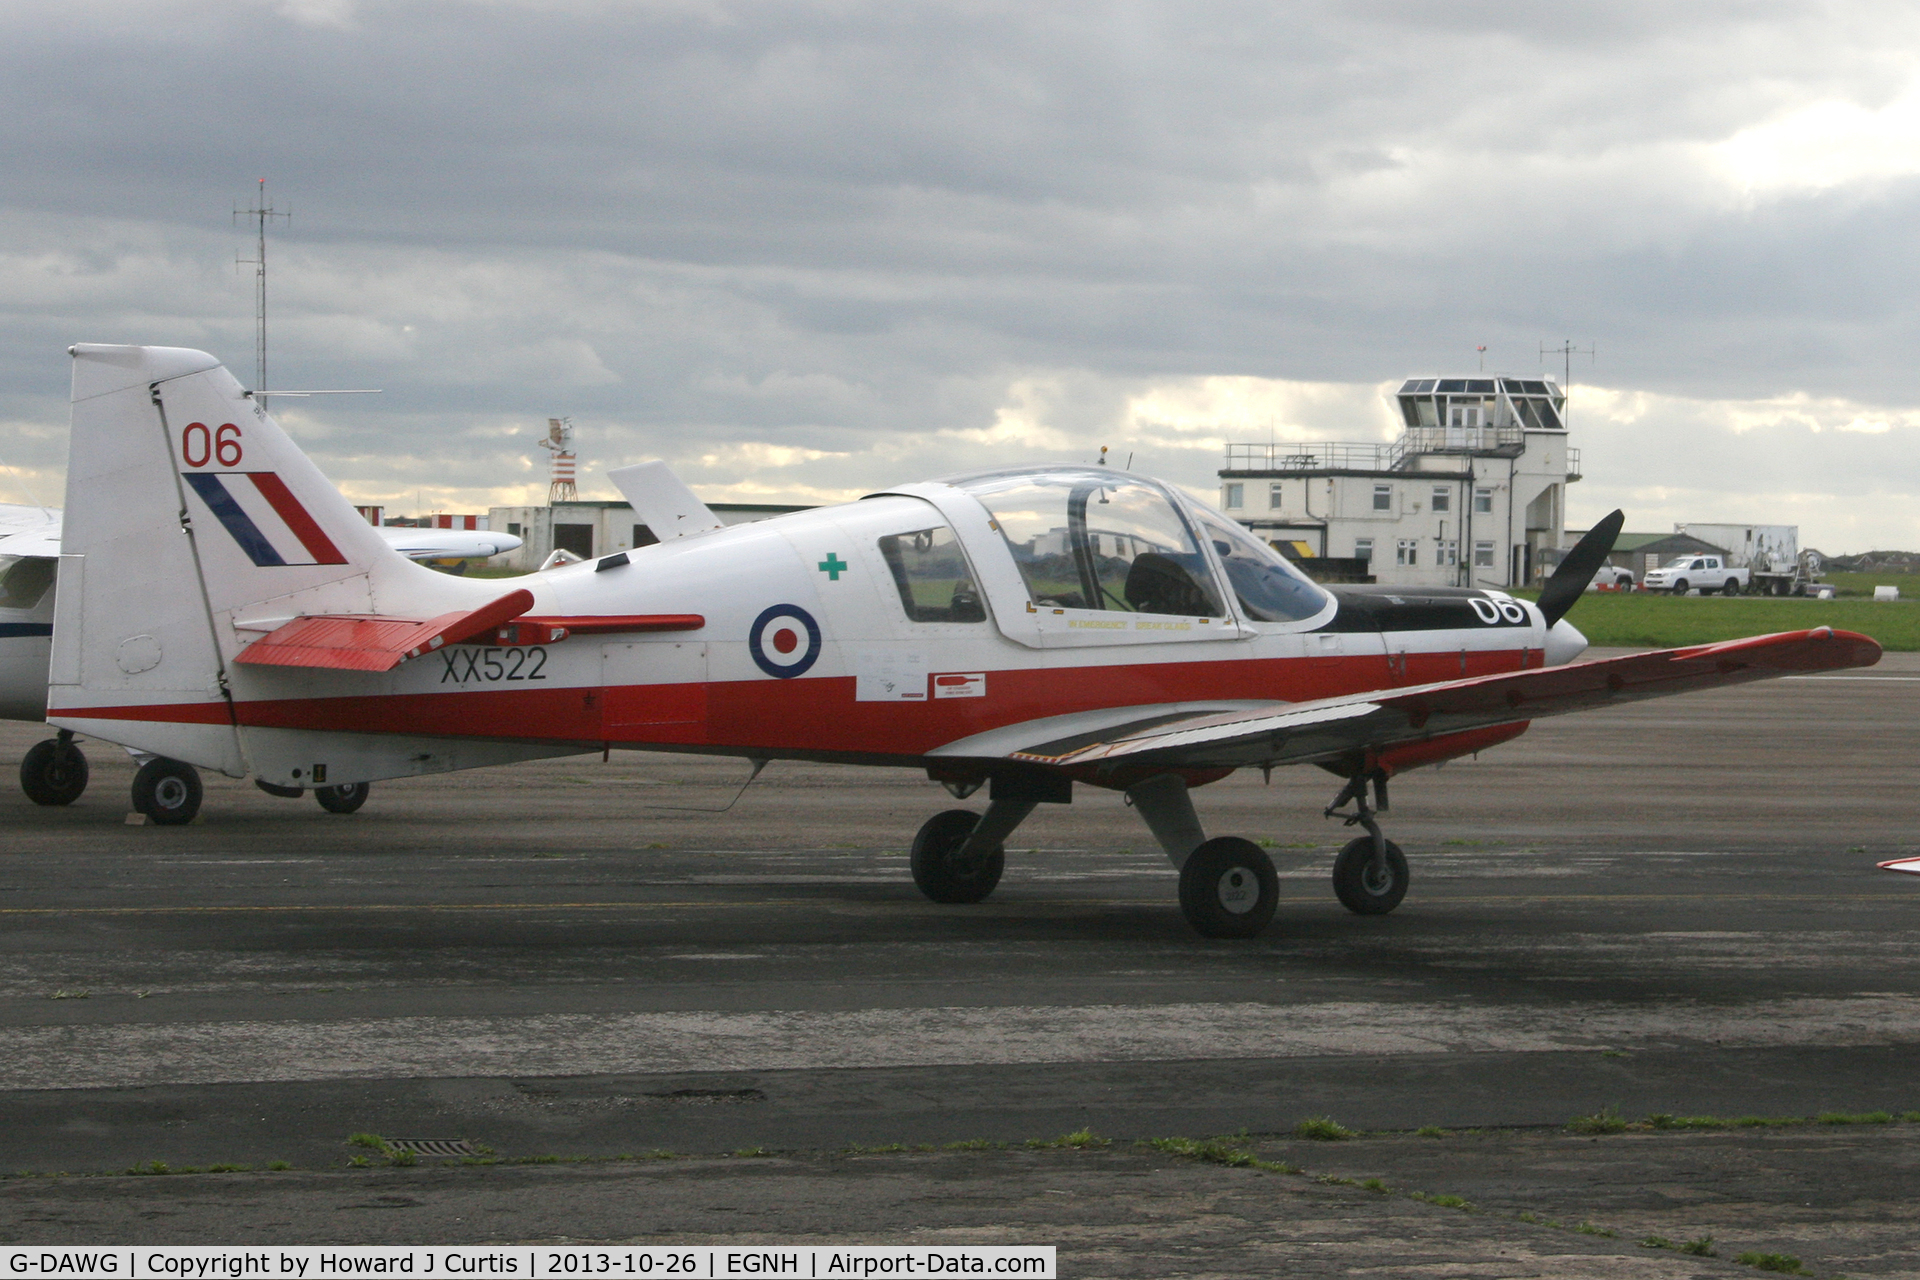 G-DAWG, 1973 Scottish Aviation Bulldog T.1 C/N BH120/208, XX522/06. Privately owned, a resident here.